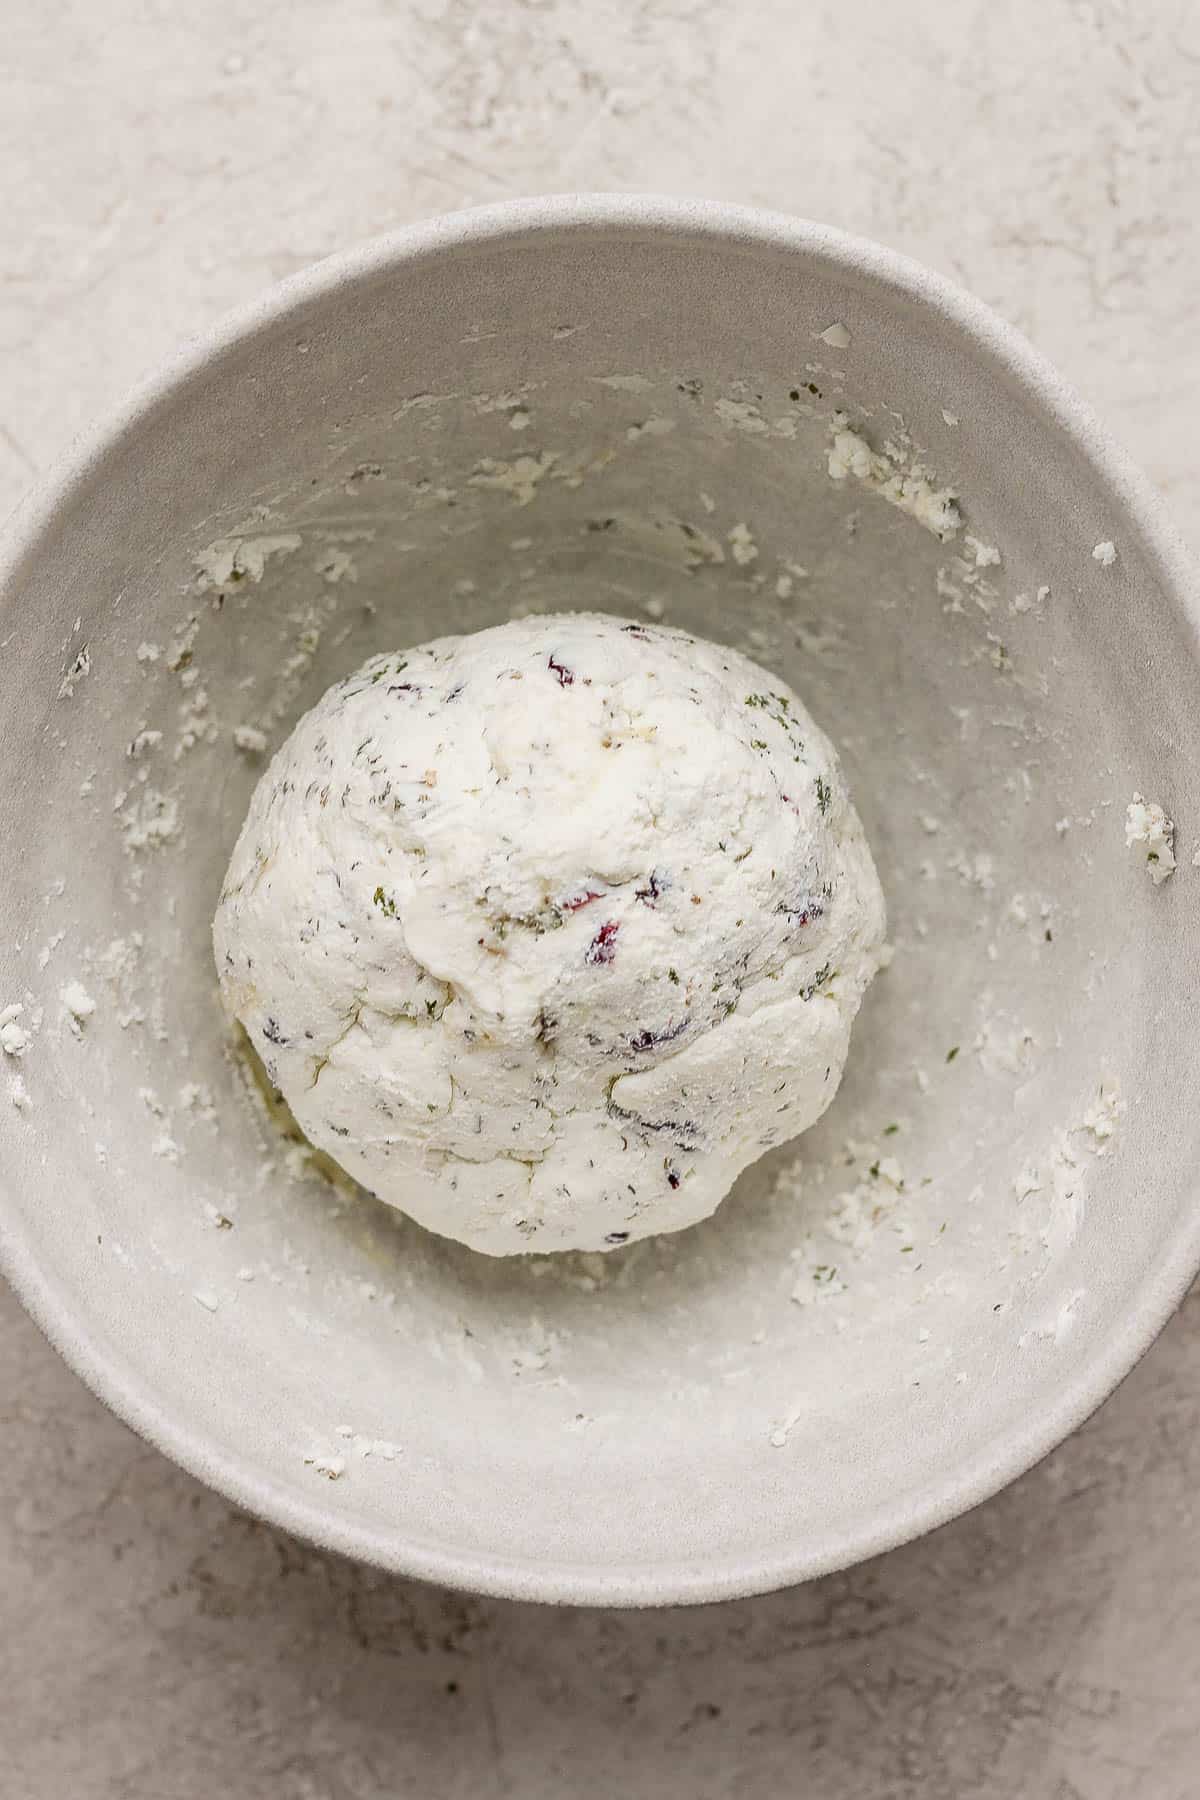 The goat cheese ball formed in a bowl.